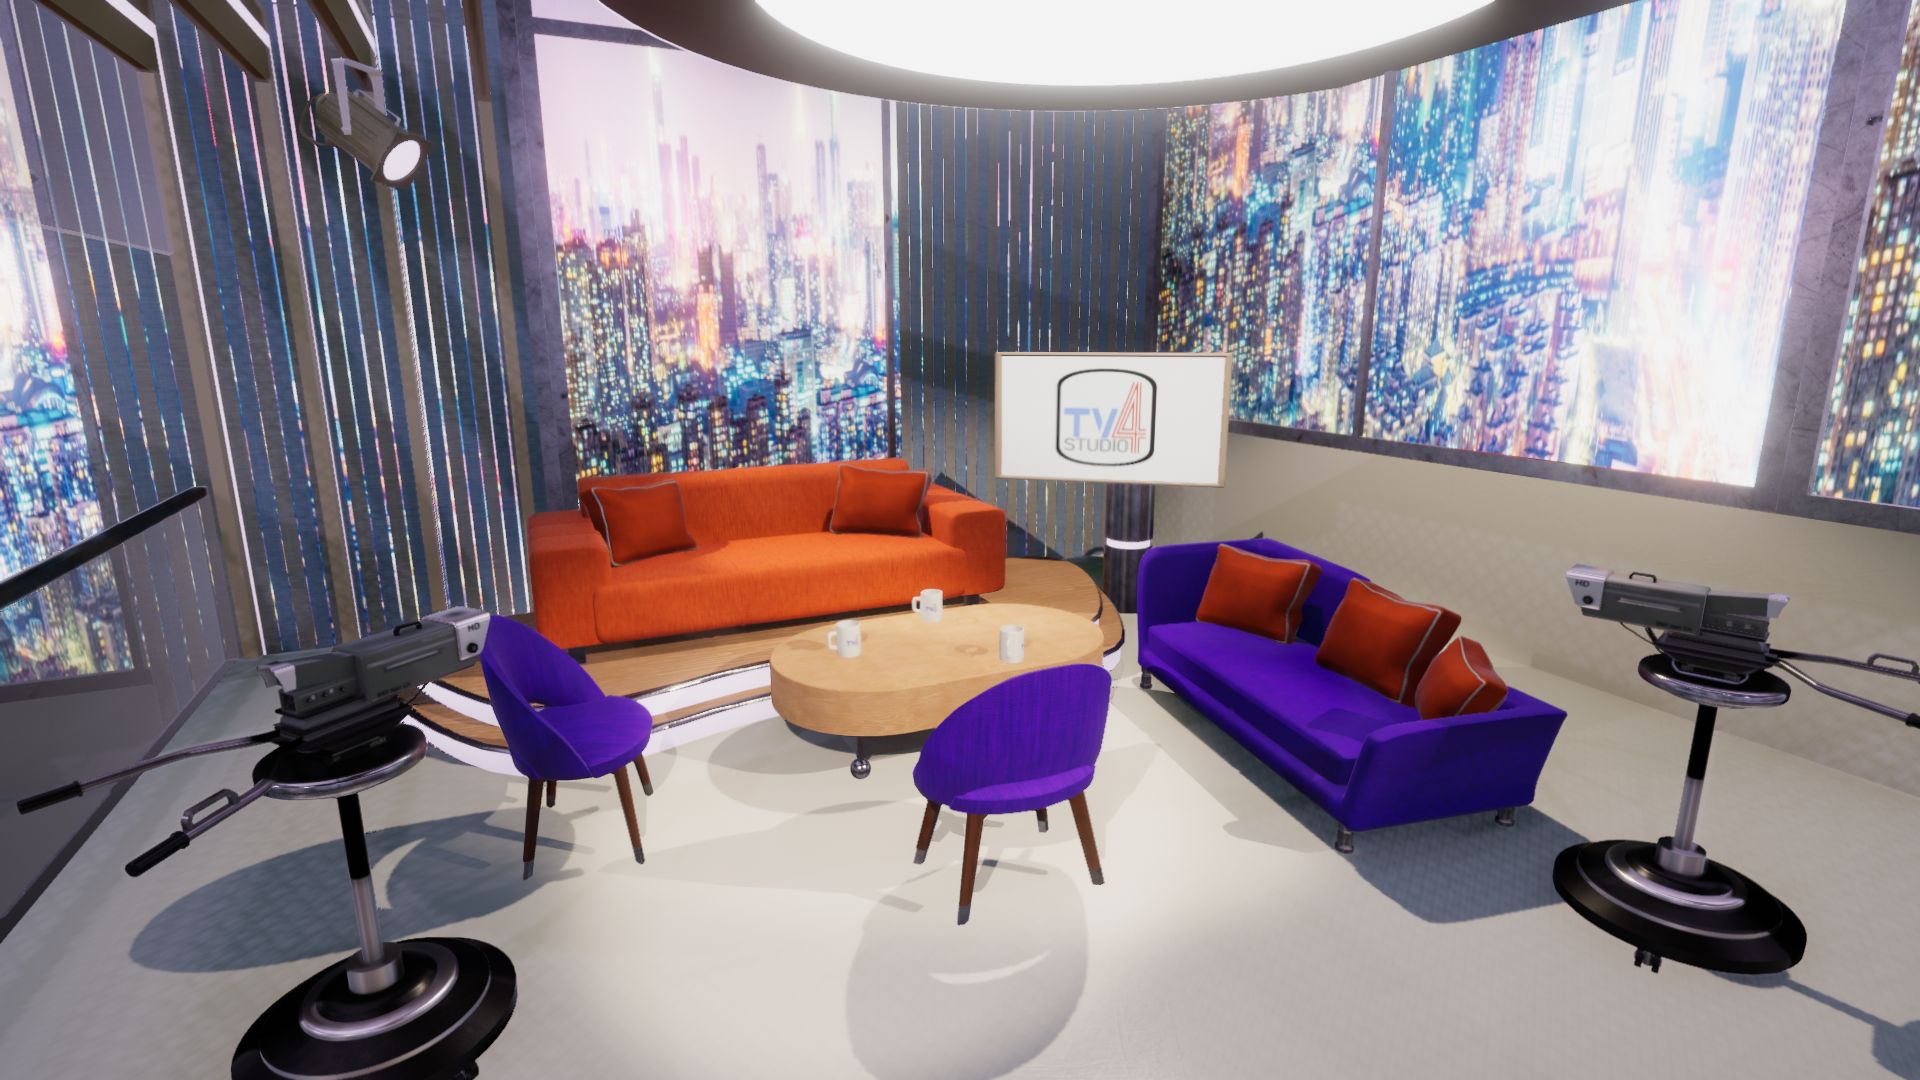 An image showing TV Studio 4. asset pack, created with Unity Engine.